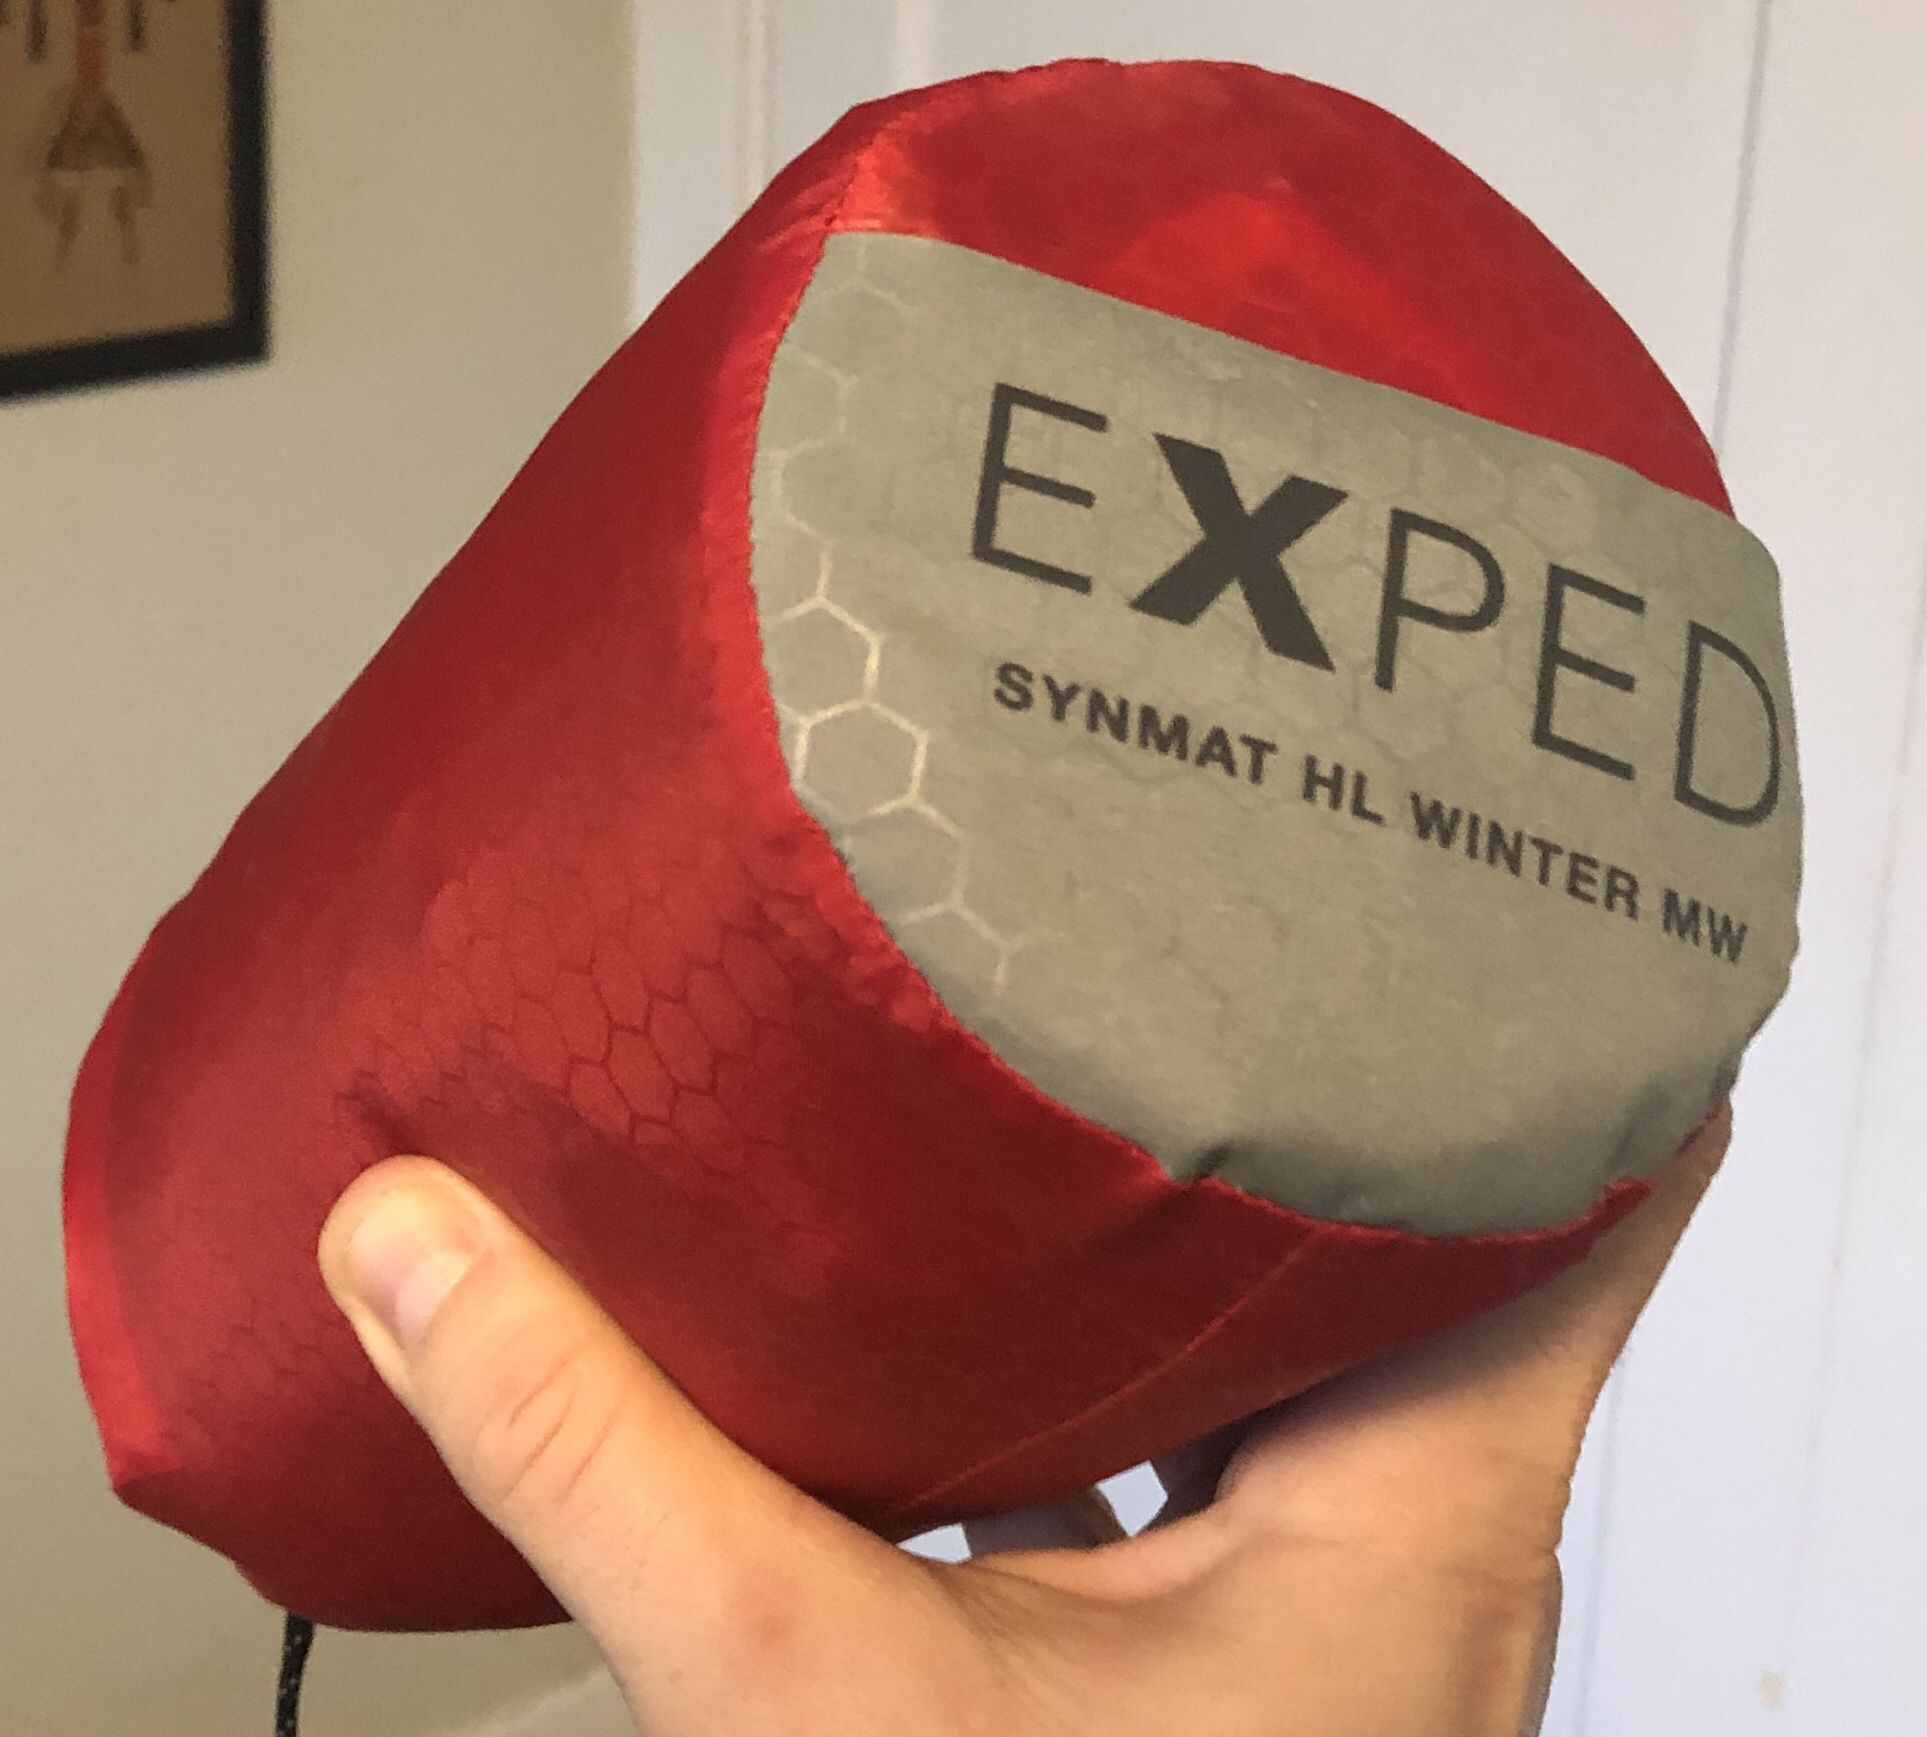 Exped Synmat HL Winter MW